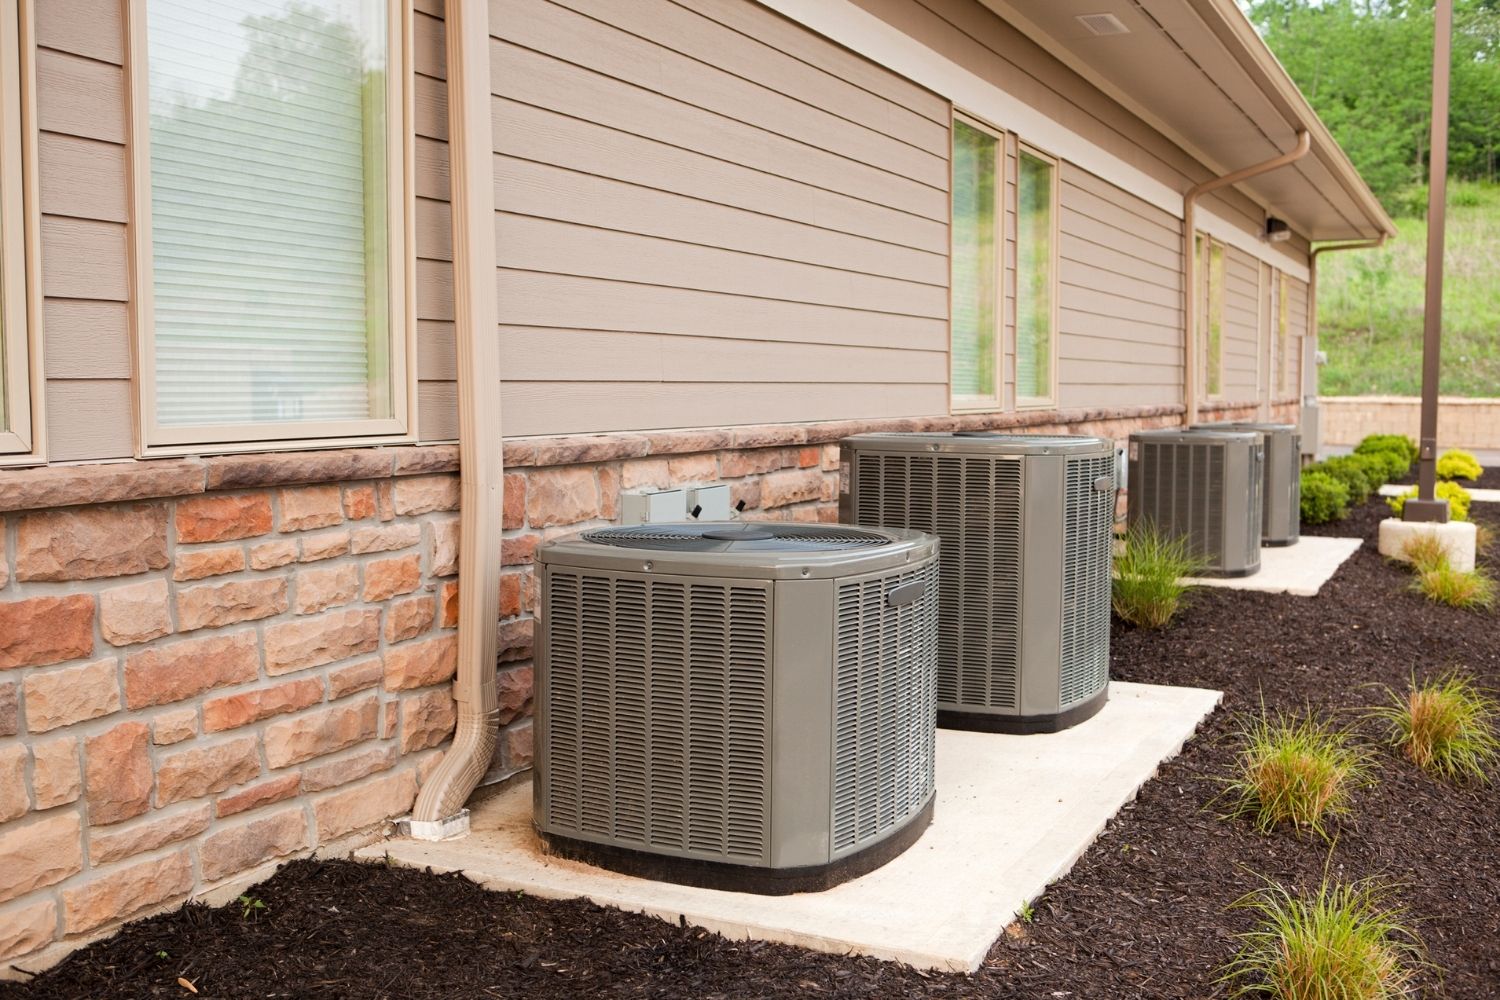 A row of HVAC units lined up against a house.